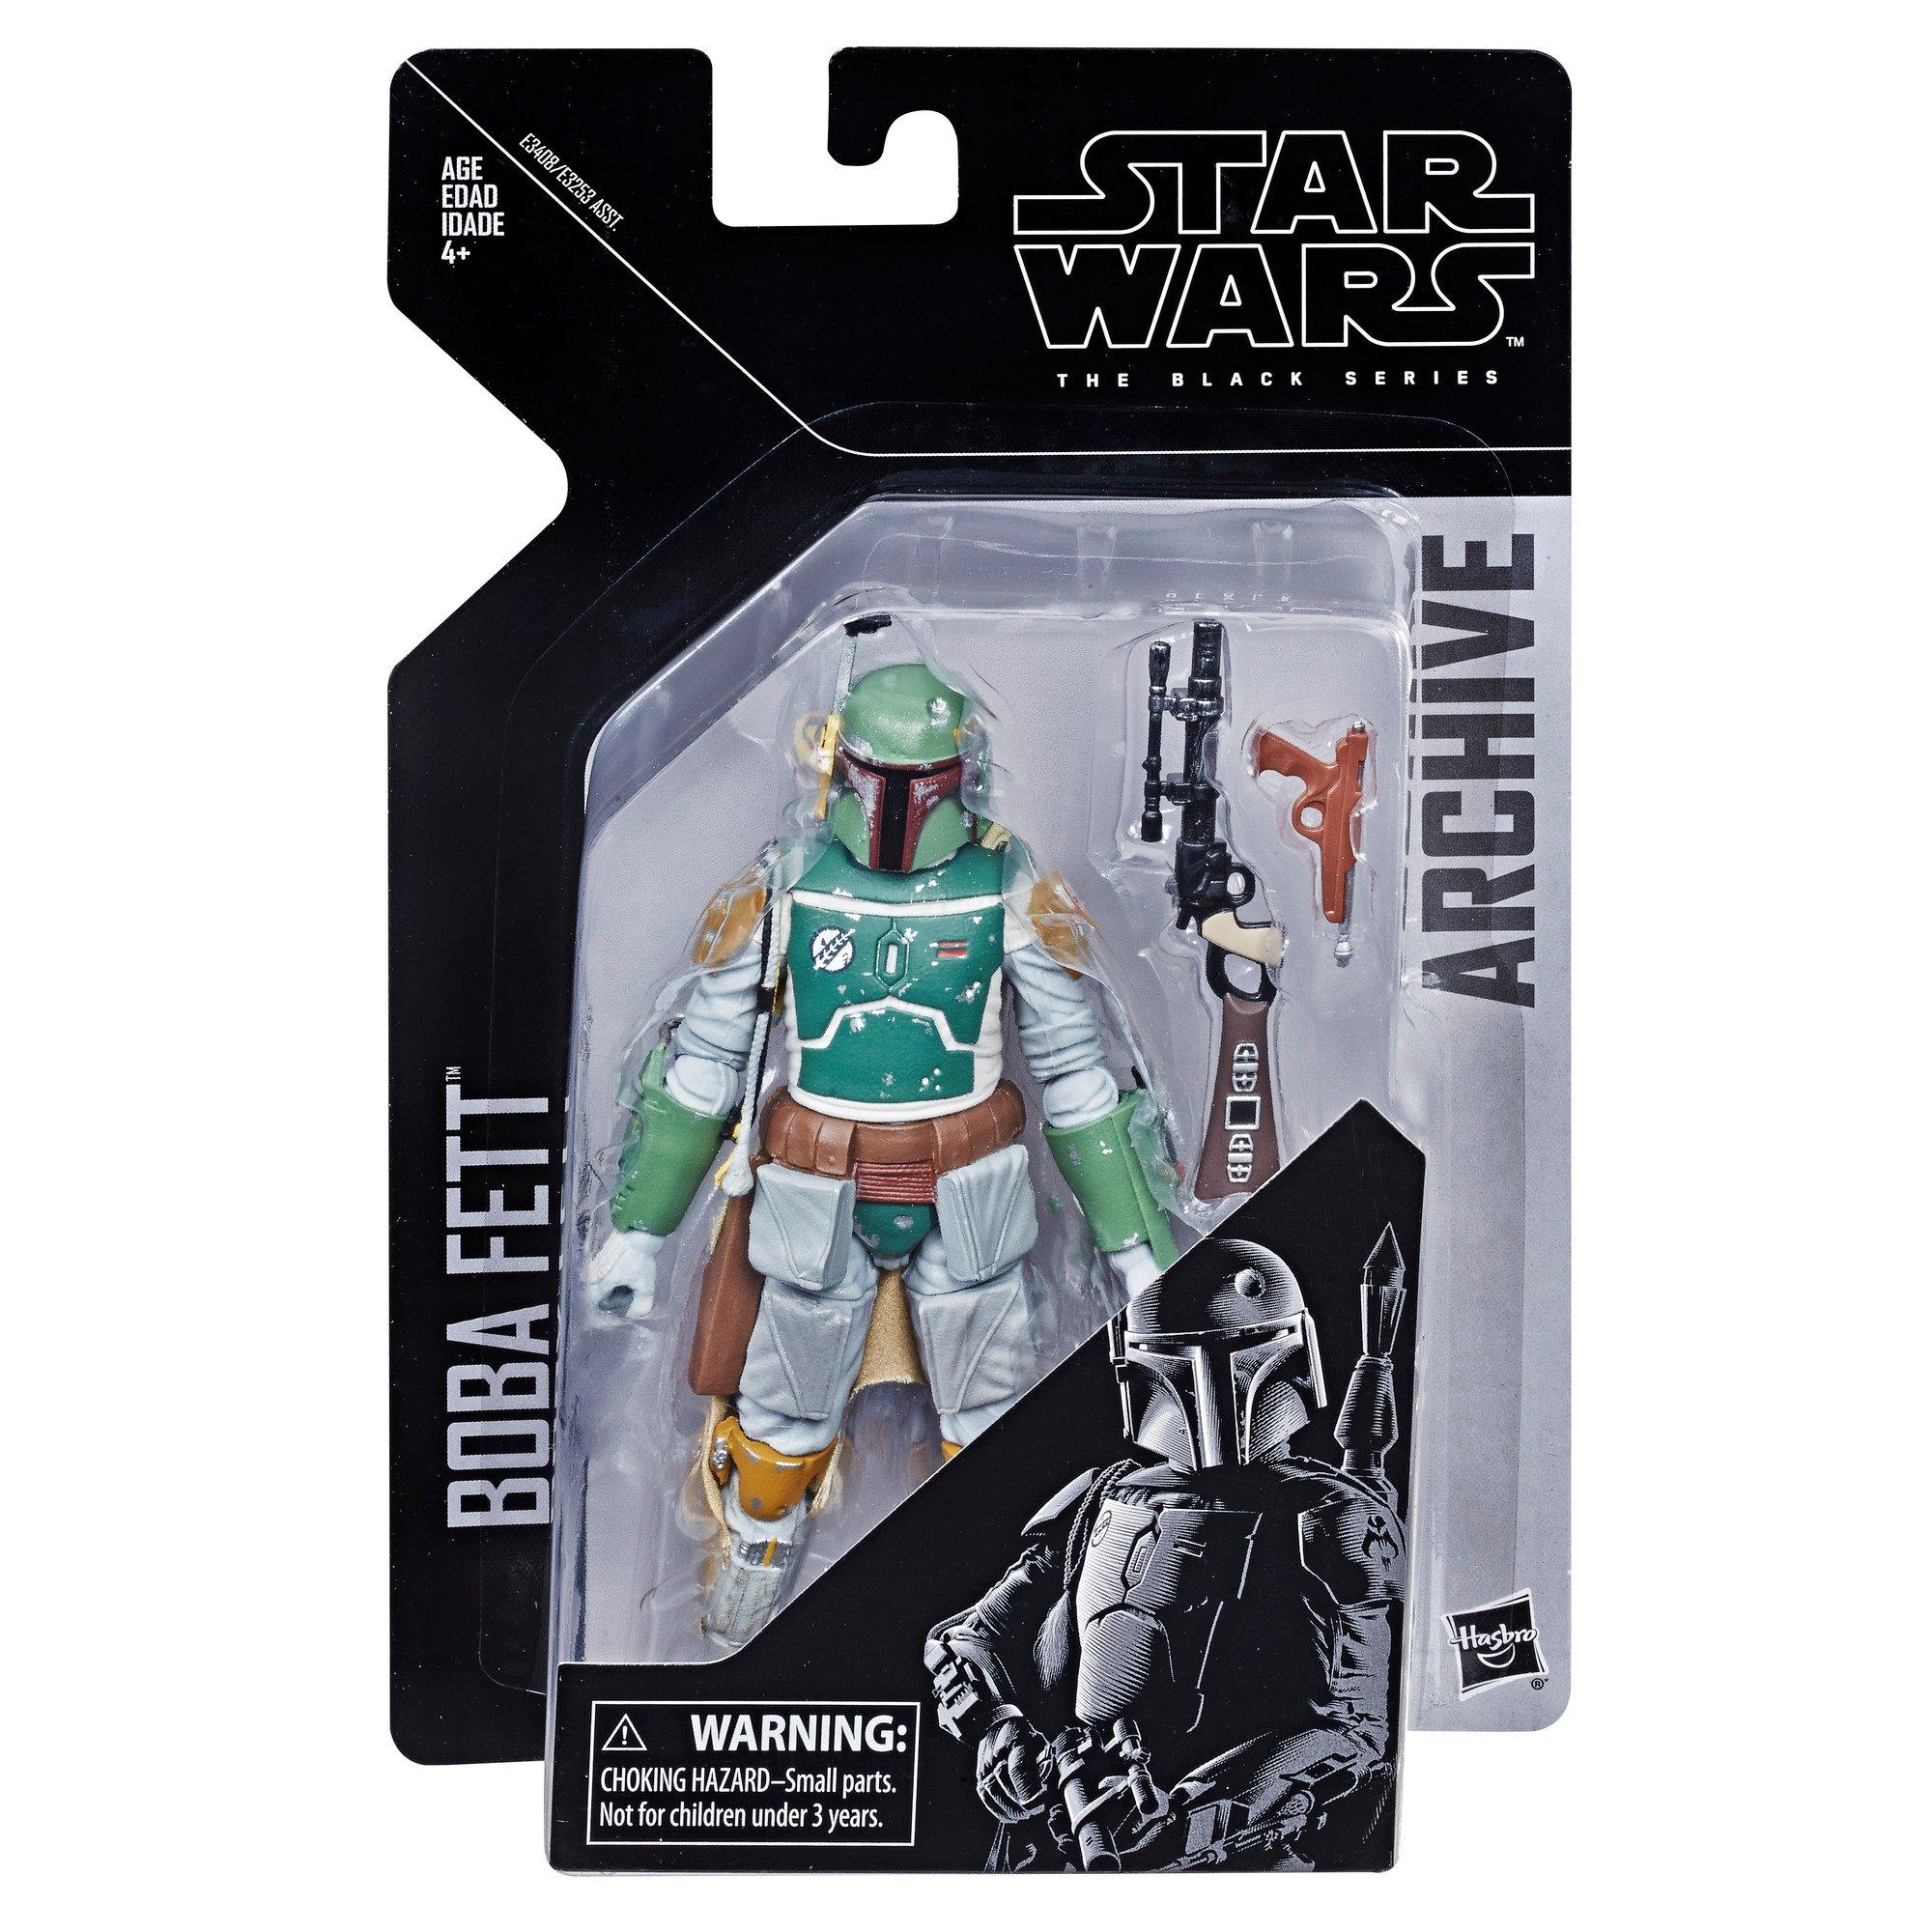 Toys Collectibles And Games Star Wars The Black Series - roblox 2017 series 2 phantom forces ghost mini figure online code